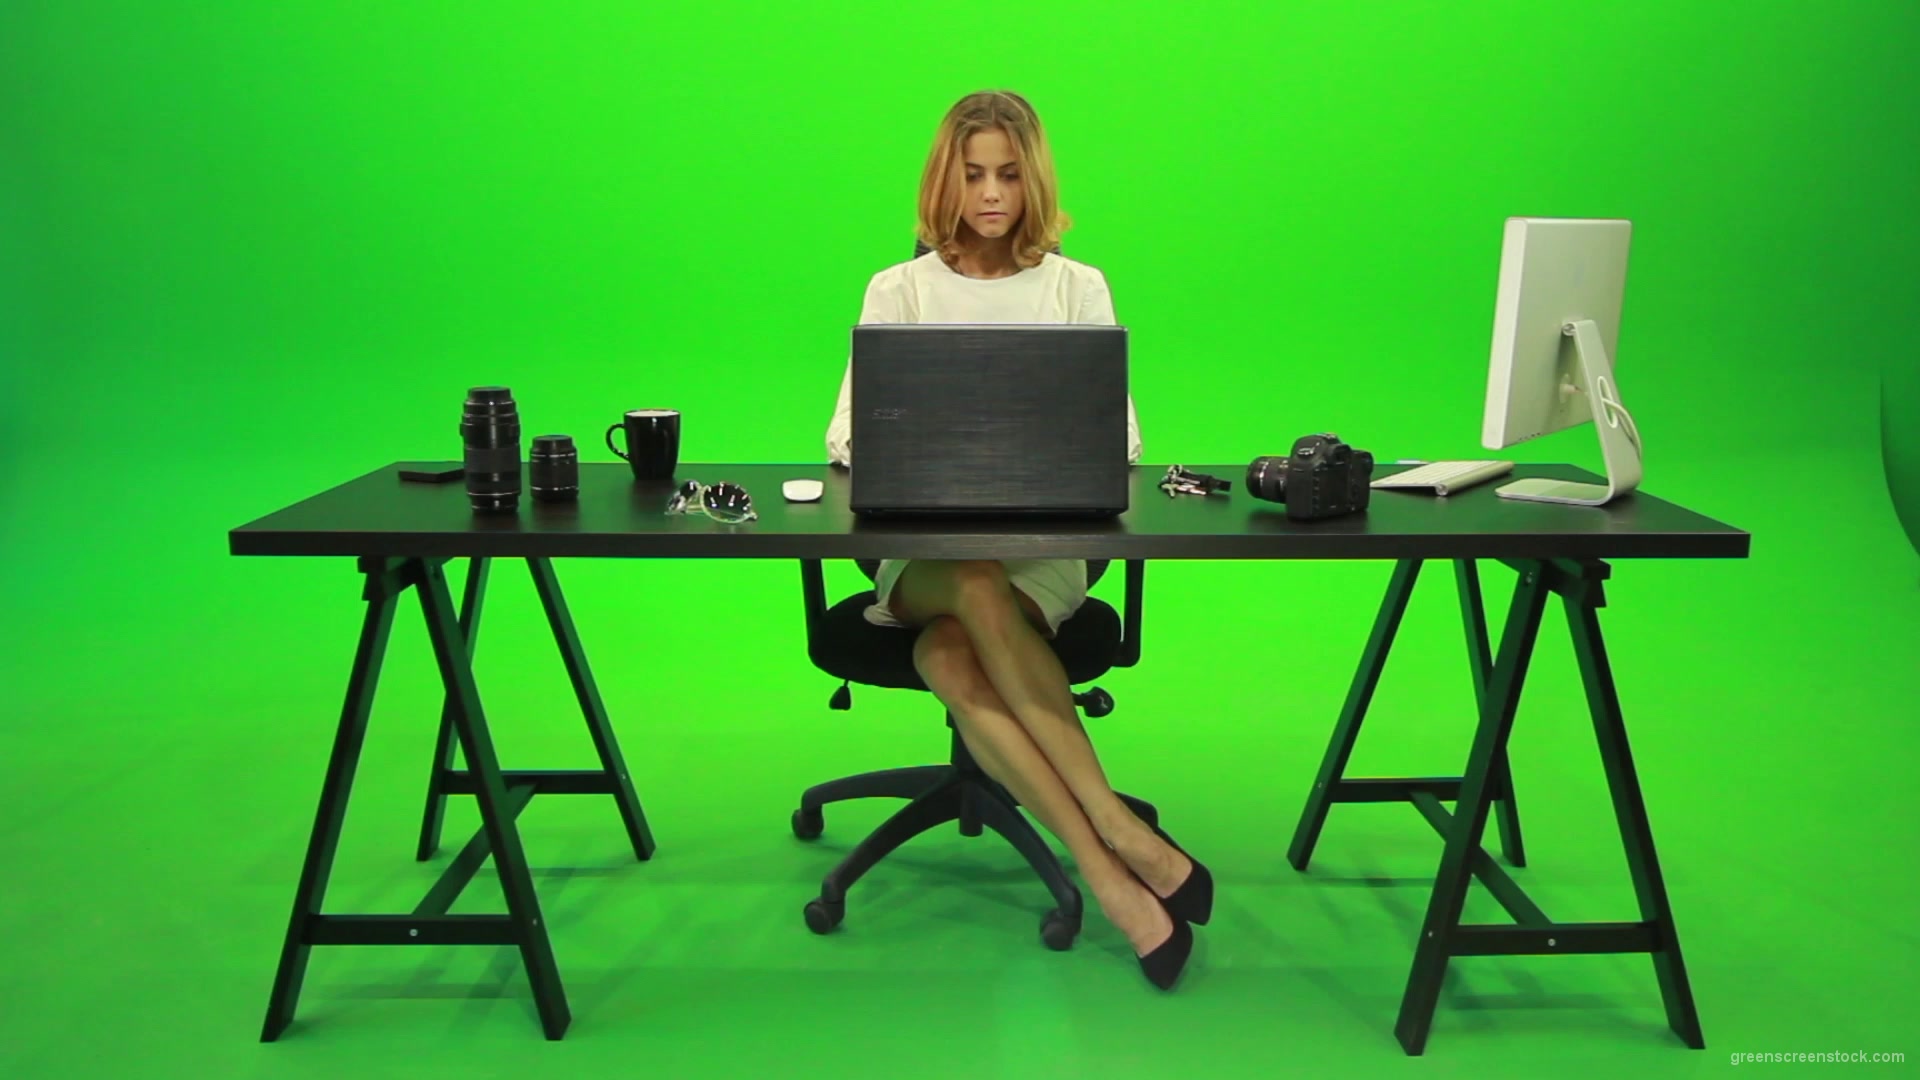 Business-Woman-Working-in-the-Office-2-Green-Screen-Footage_001 Green Screen Stock